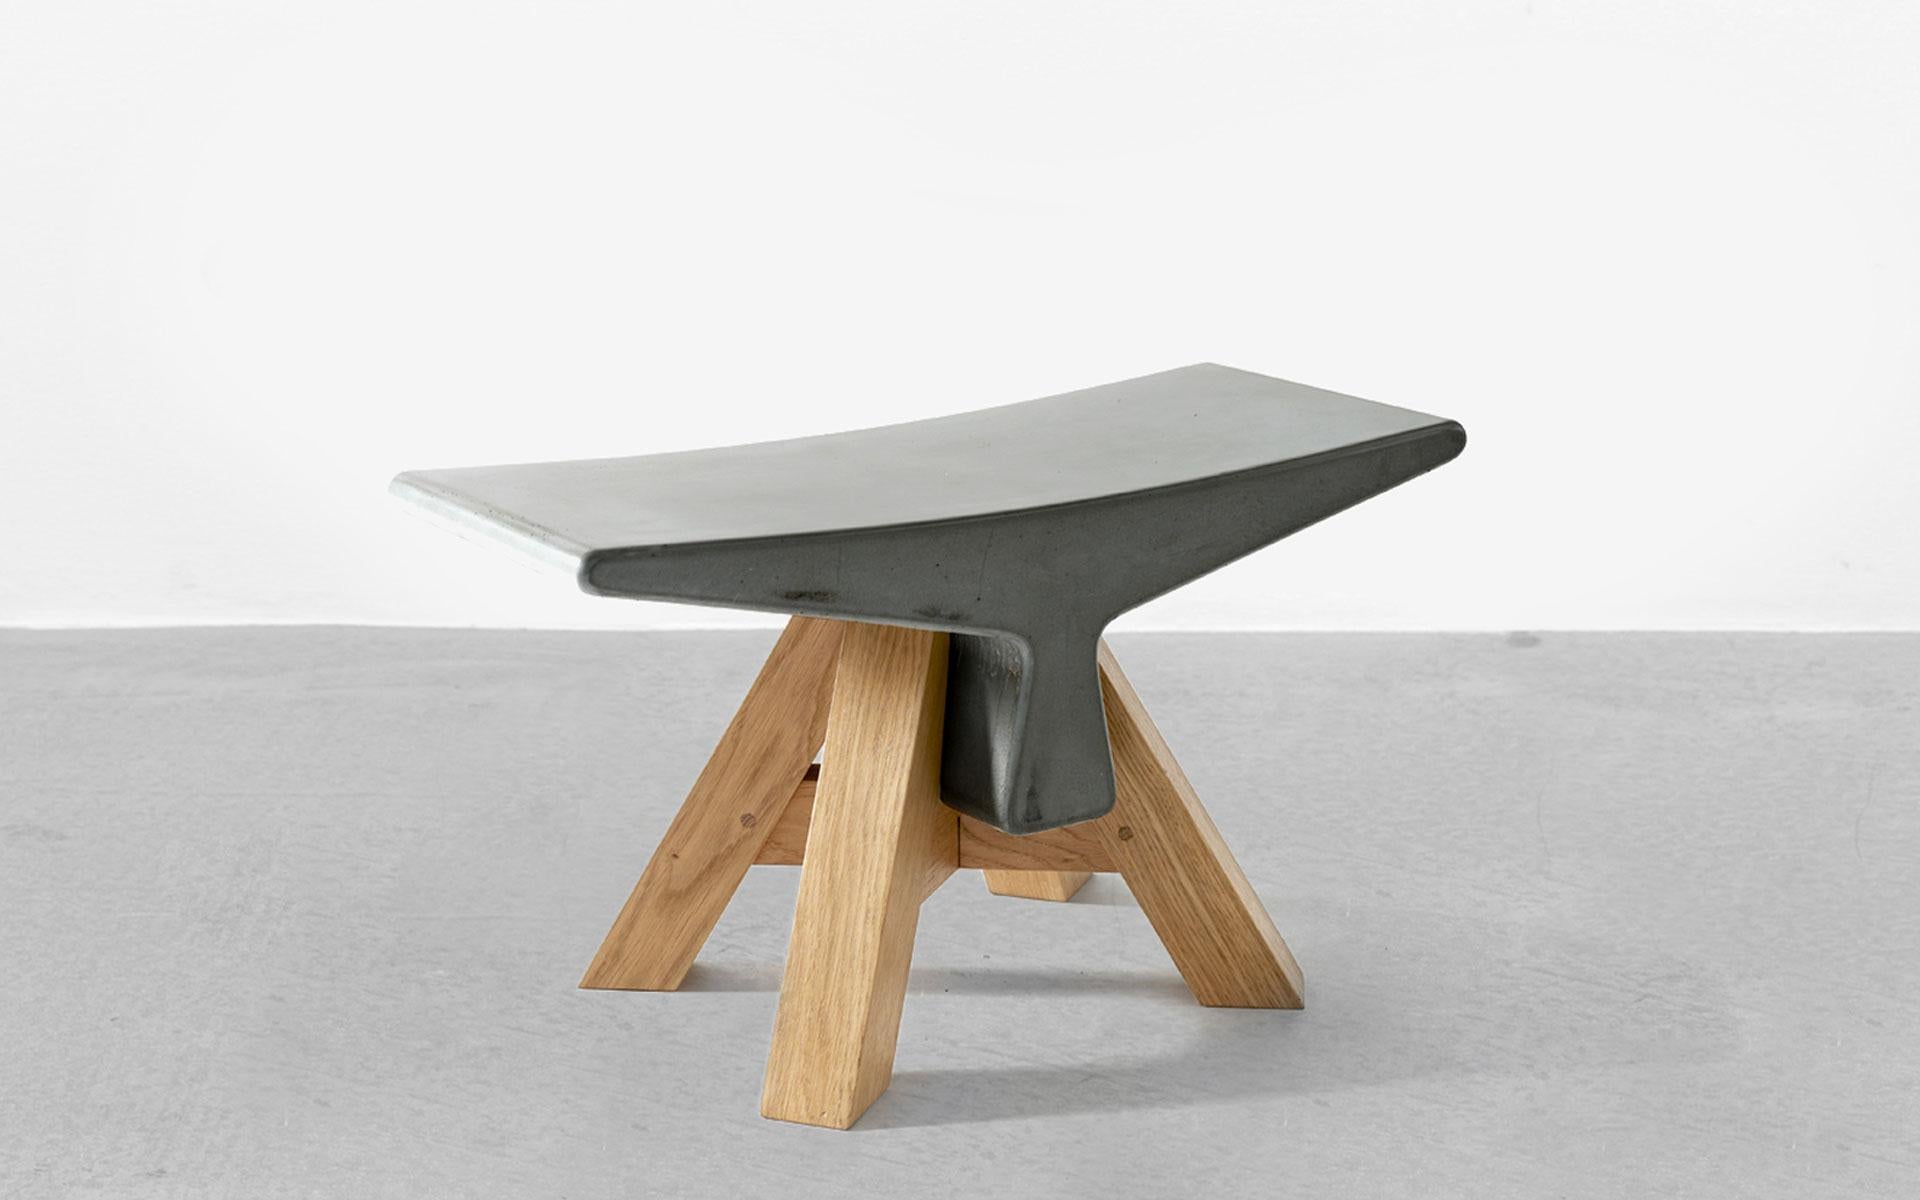 Bone Ductal is a molded concrete and oak stool, a step up from its marble version on the evolutionary scale. Convoking the timeless, aspiring to meditation, the Bone Ductal stool uses archetypes, half-way between an Asian neck-support and a Japanese